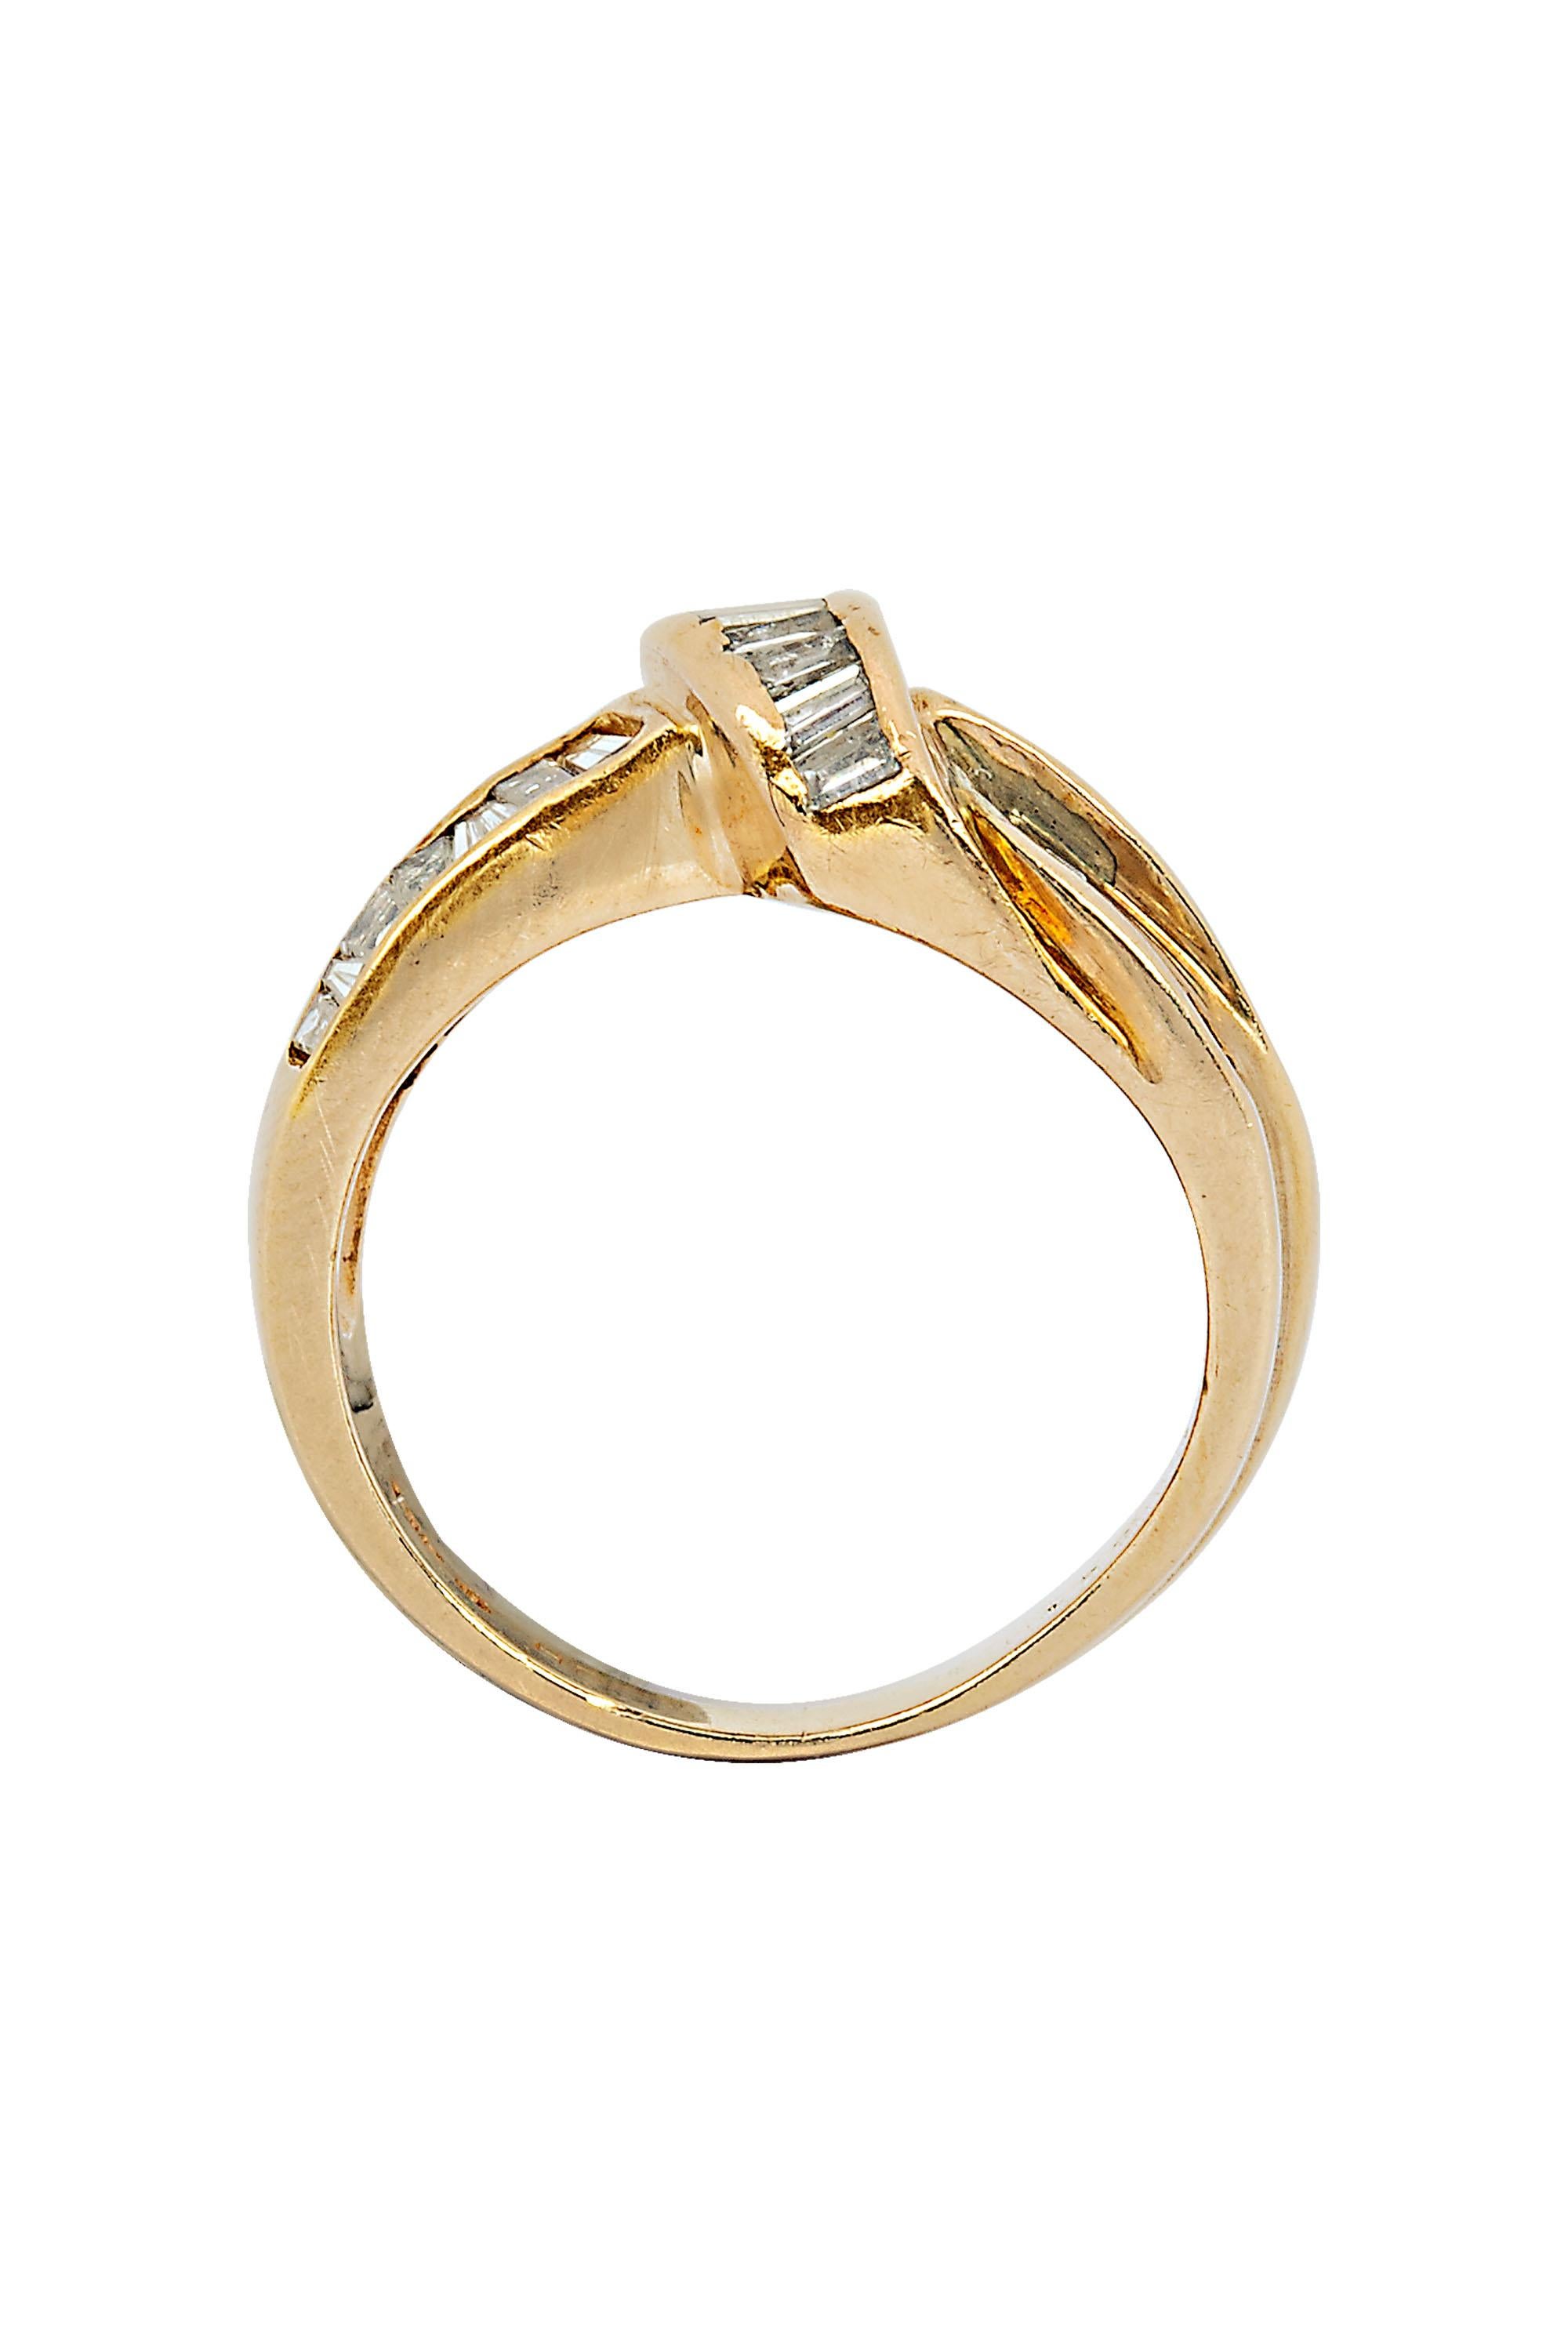 This timeless diamond cocktail wedding ring with knot design containing approximately 1.50 carat baguette near colorless diamond. It is crafted in 14K yellow gold size 6. The ring weighs 6 grams and the top of the ring measures approximately 13 mm.